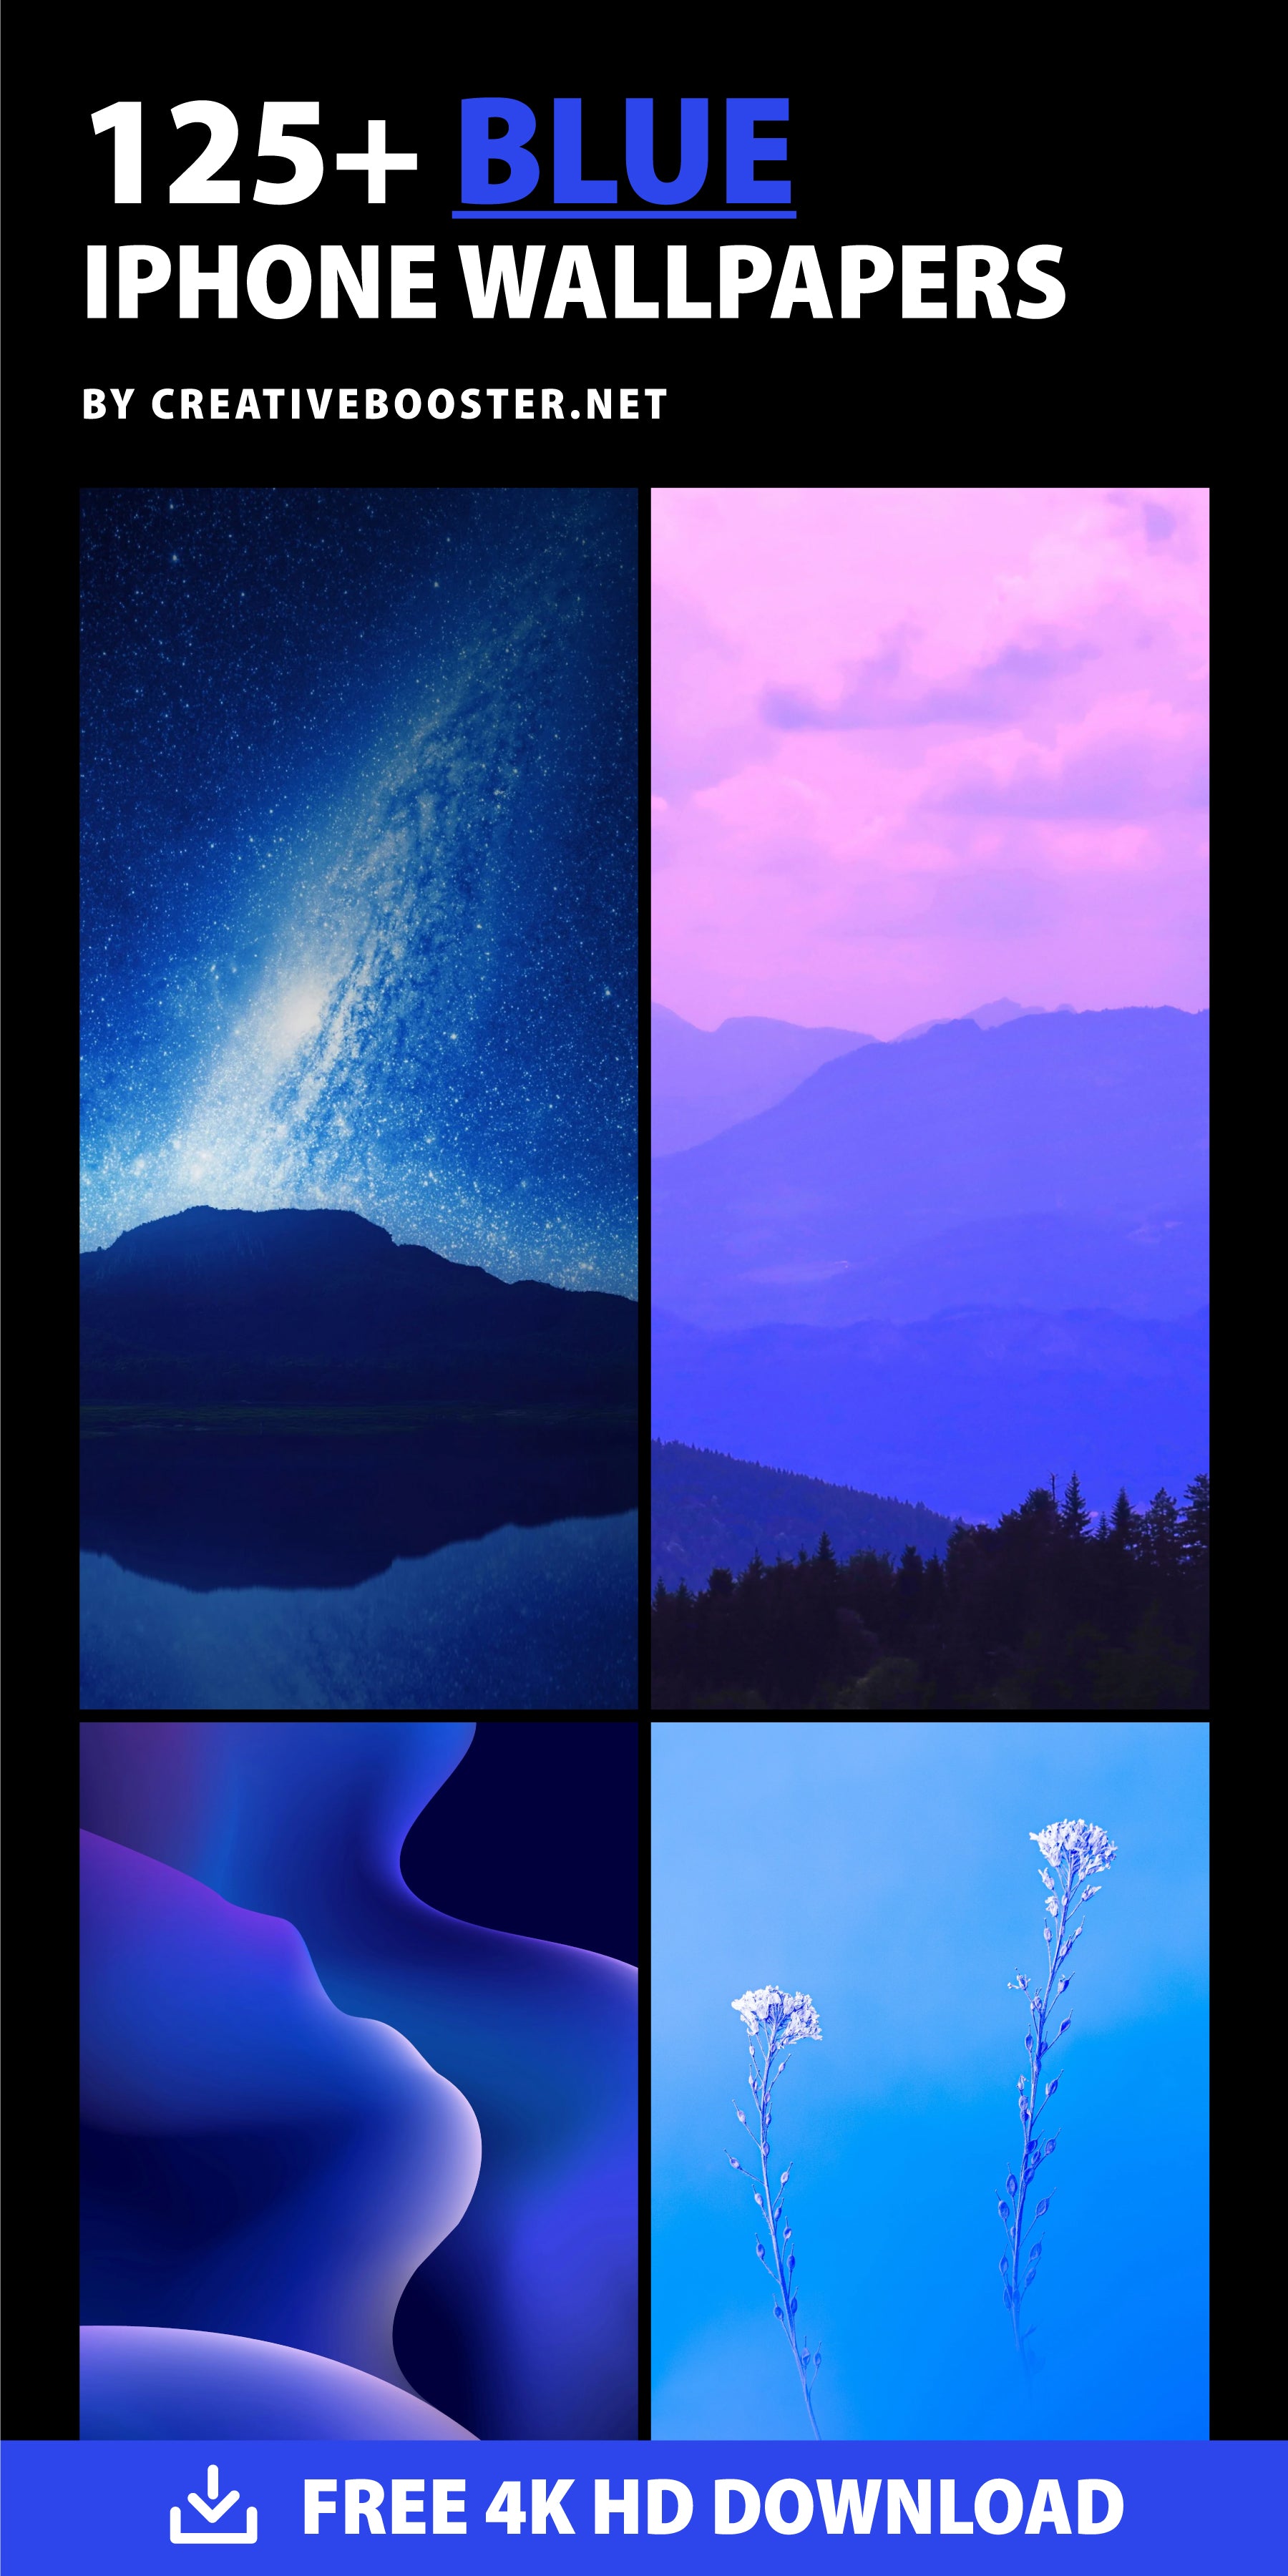 Best-Aesthetic-Blue-iPhone-Wallpapers-Free-4k-HD-Download-Pinterest